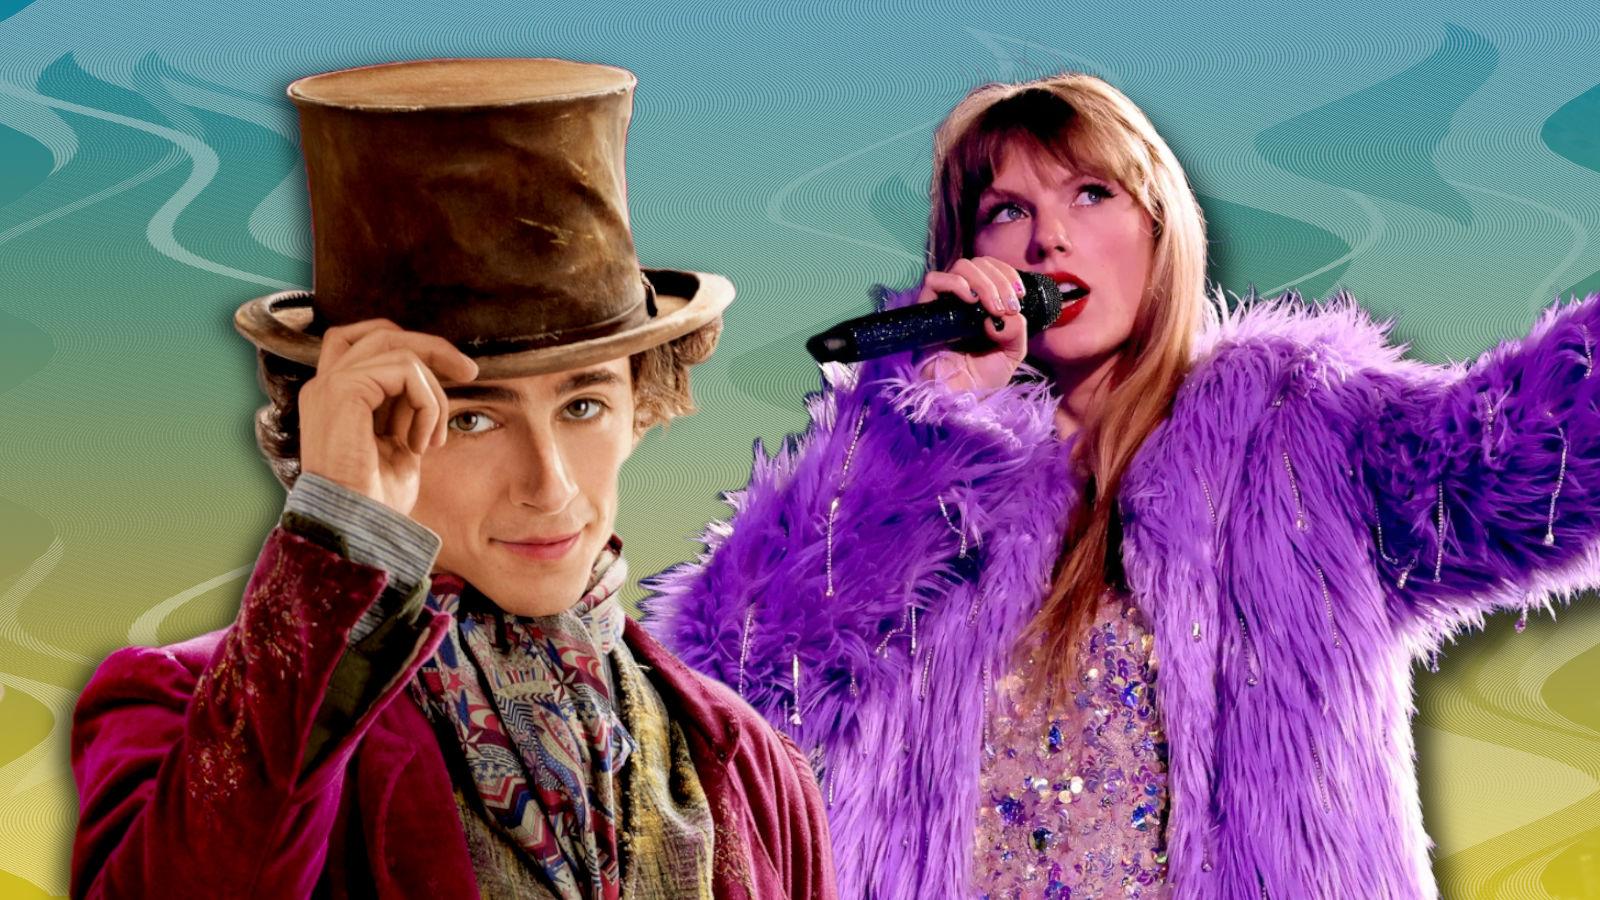 Timothee Chalamet in Wonka and Taylor Swift on her Eras Tour